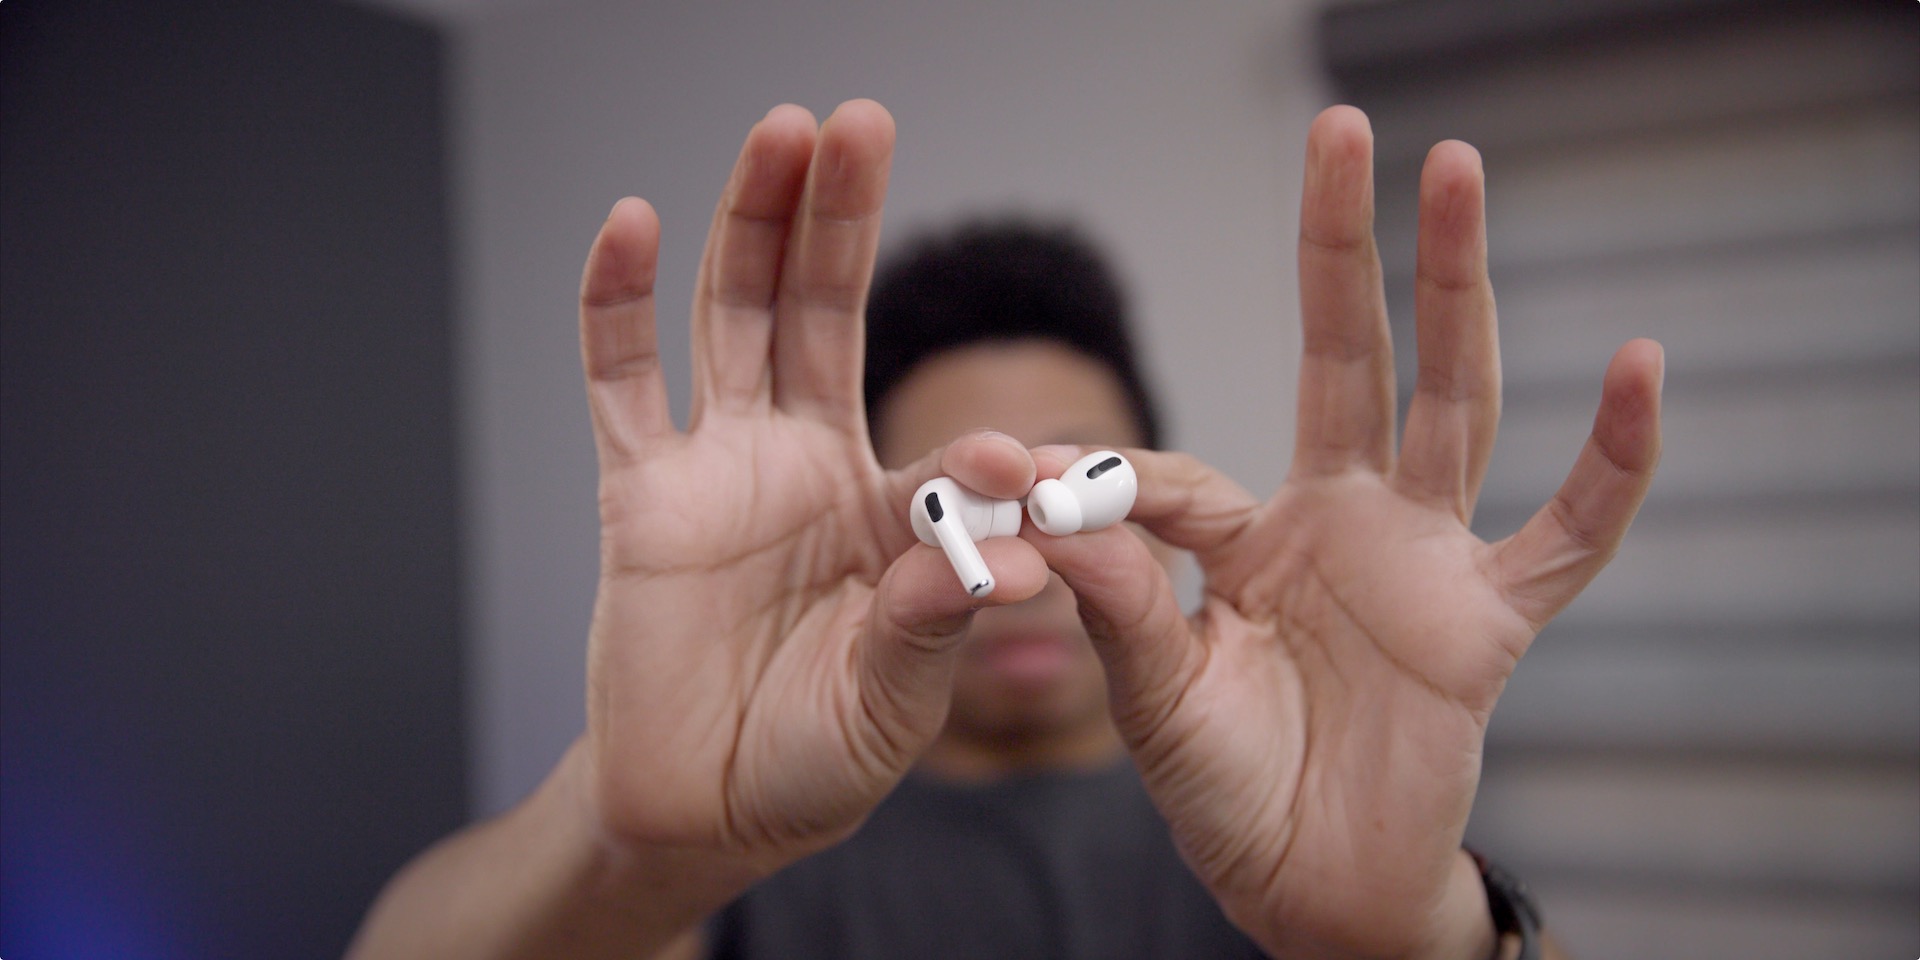 Samsung Galaxy Buds+ impressions from an AirPods Pro user [Video